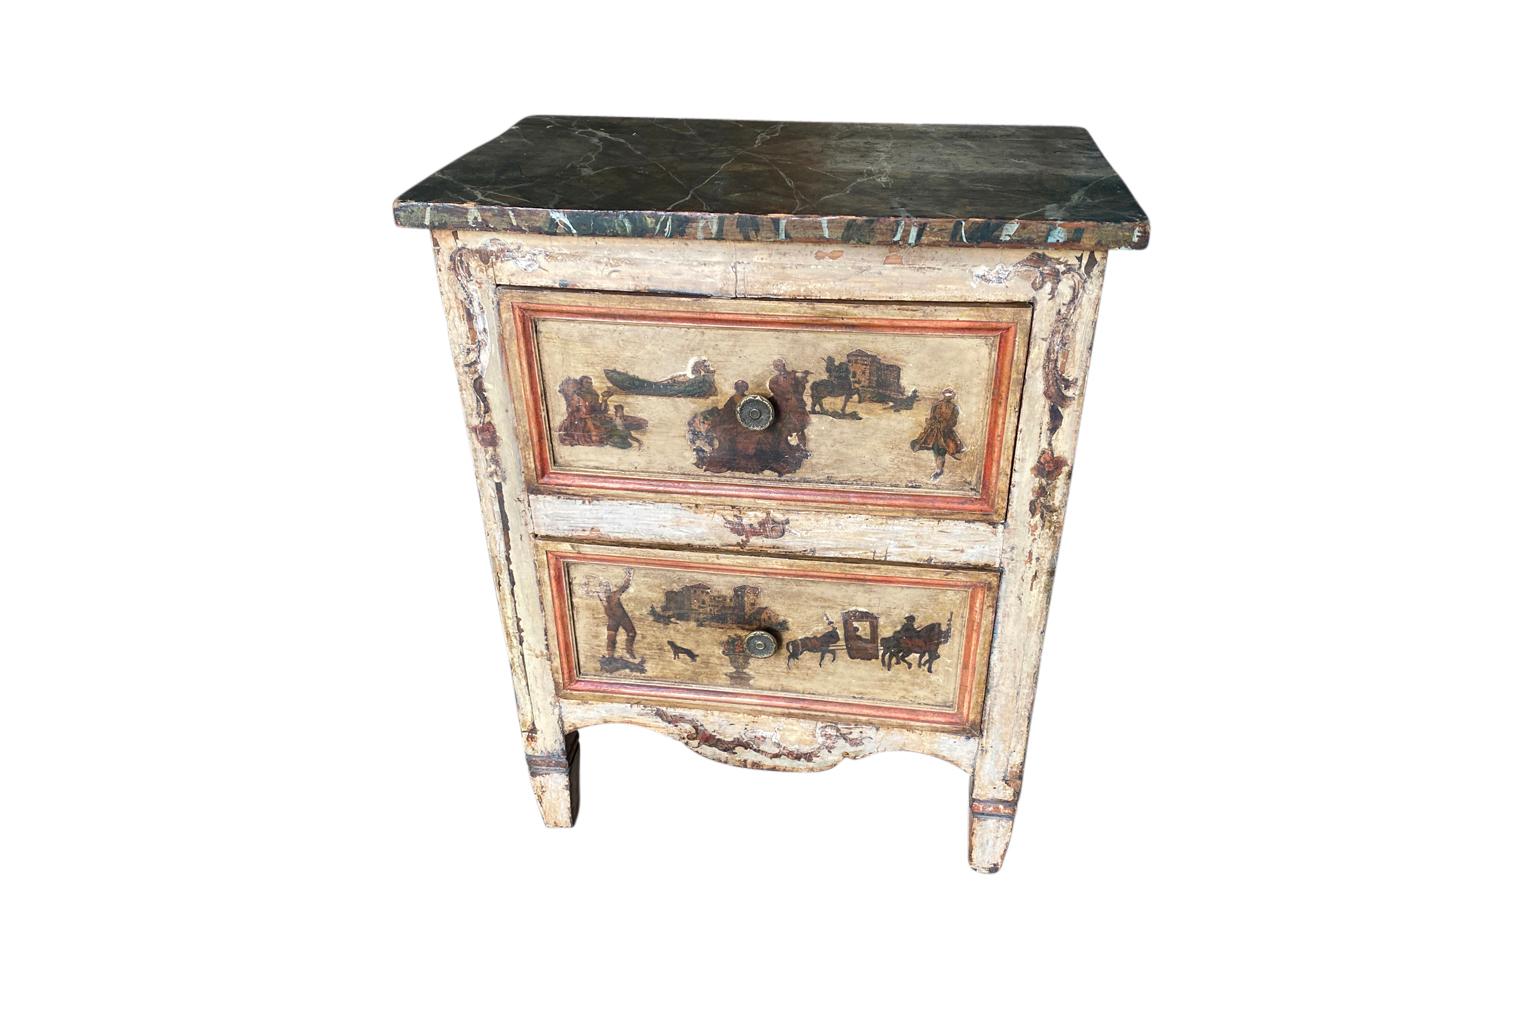 A very charming early 19th century Arte Povera Comodini from Northern Italy. Beautifully constructed in the Louis XVI style with a lovely faux marble painted top and 2 drawers. A wonderful accent piece to lend warmth and charm to its surrounding.